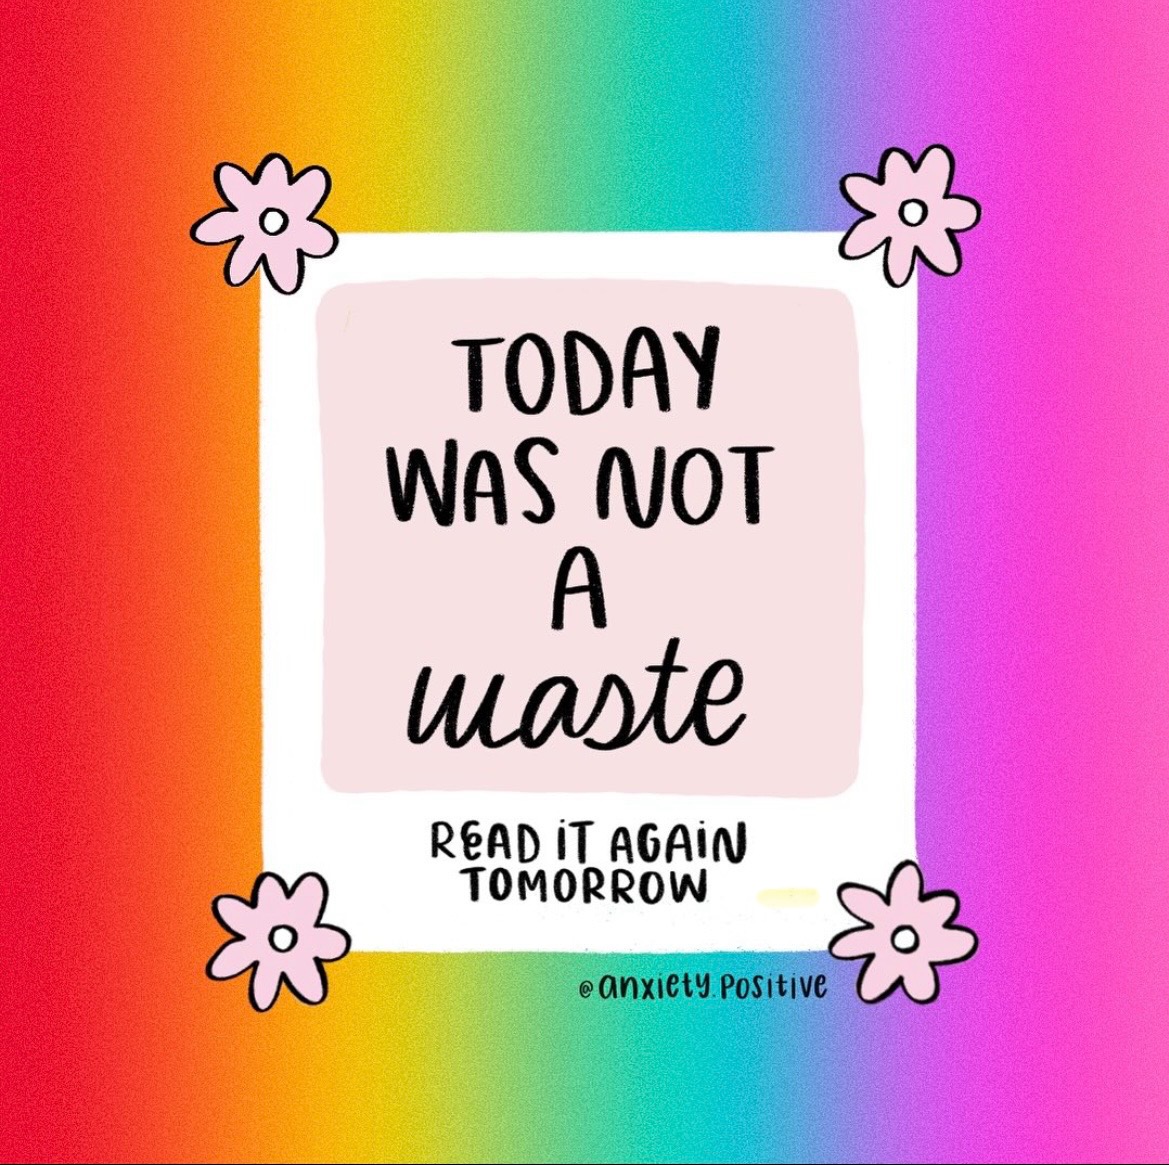 No matter what challenges today brings, it was not a waste. Remember to be kind to yourself this weekend ❤️ #aphasia #stroke #strokeawarenessmonth #strokerecovery